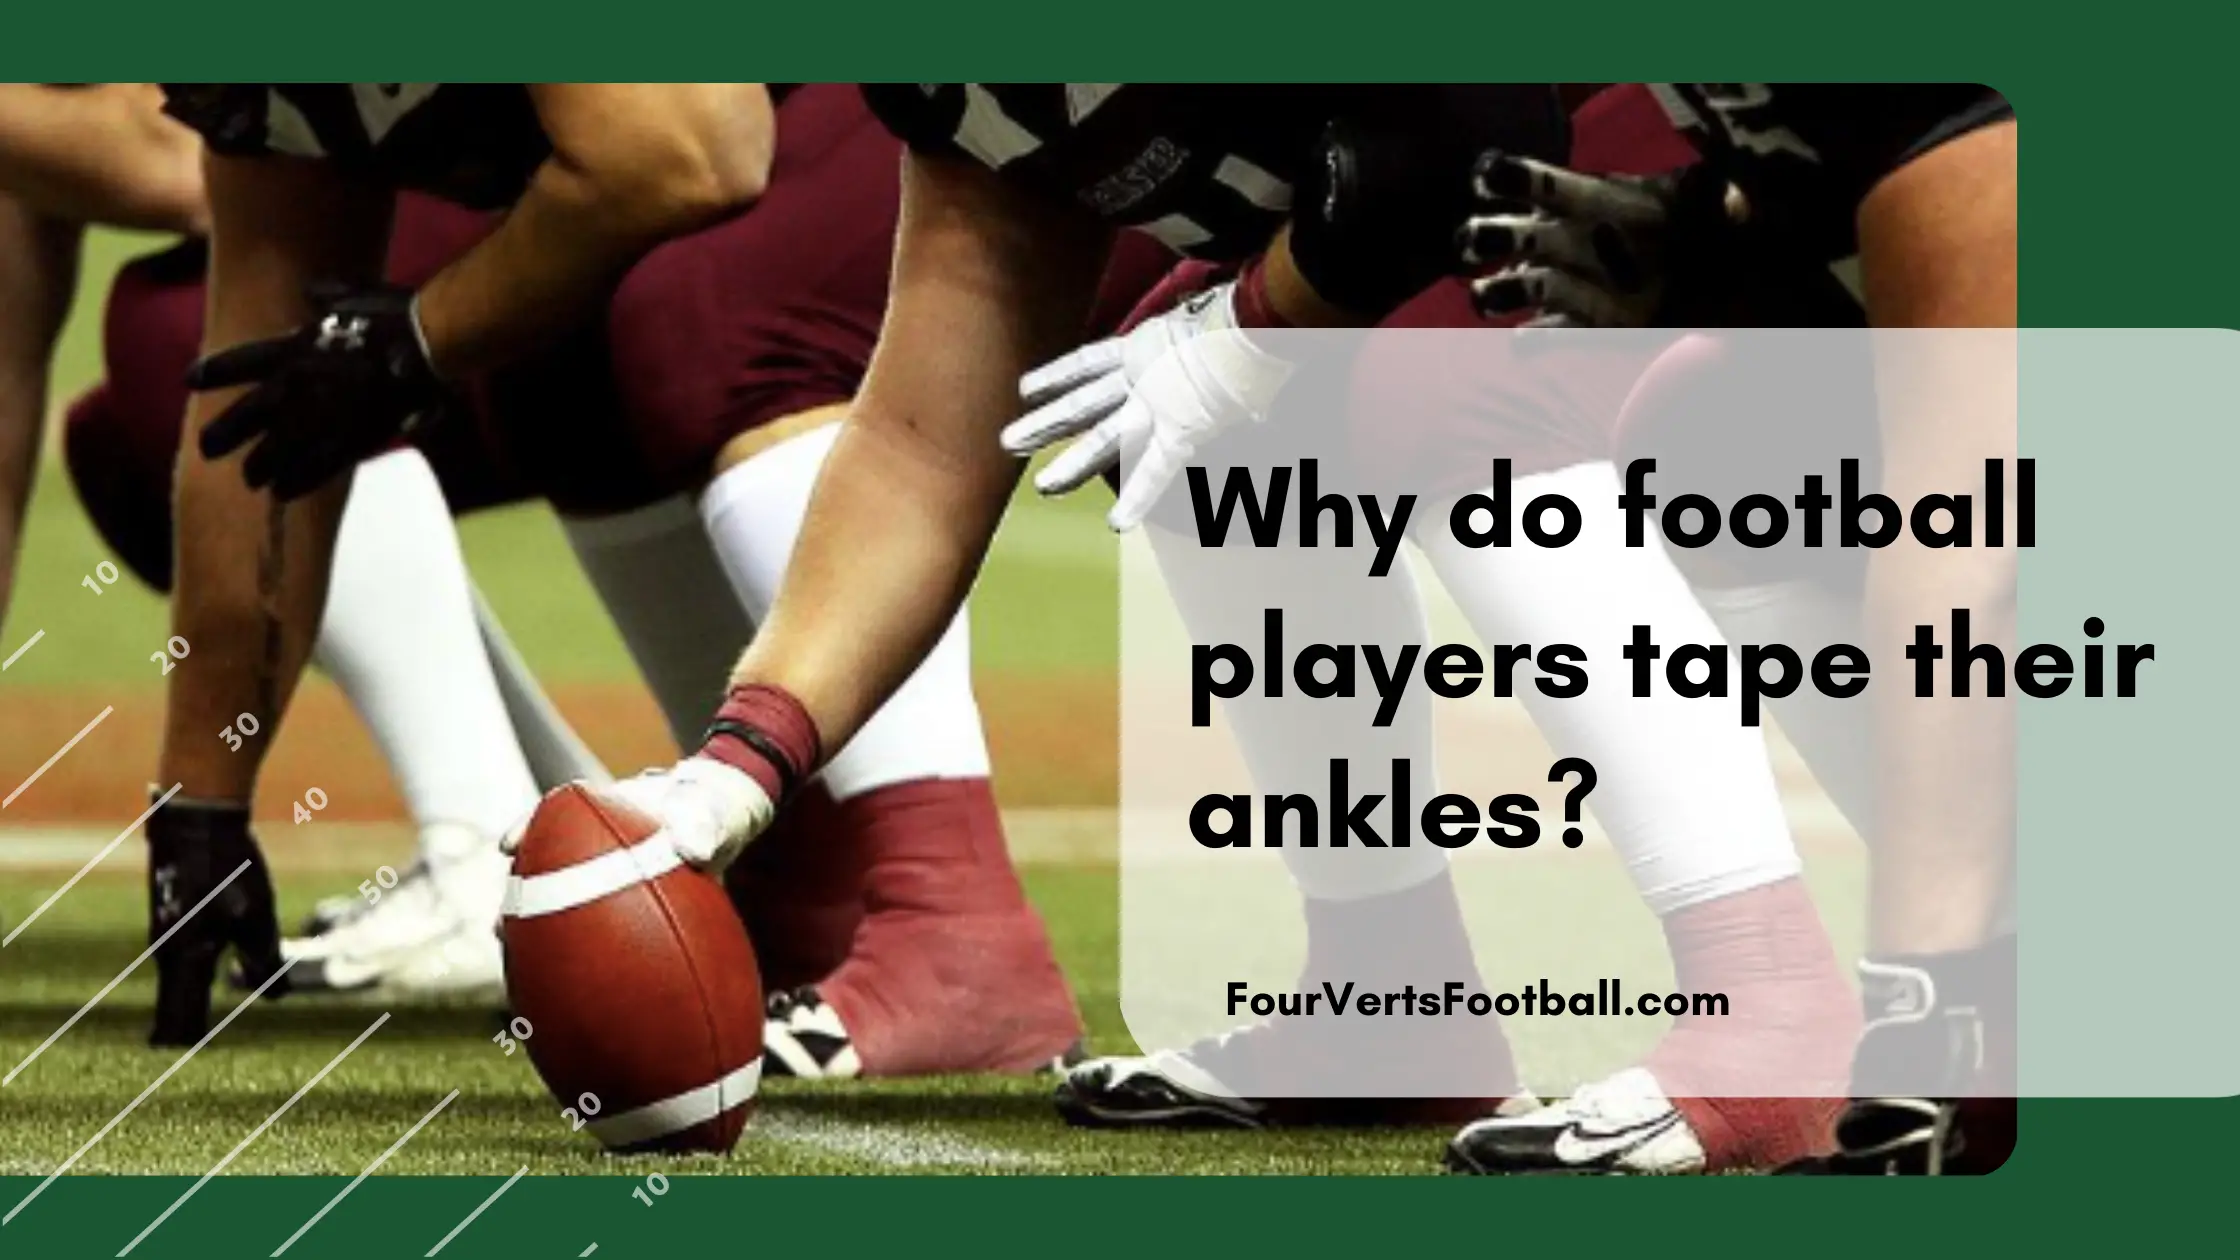 Why do football players tape their ankles?